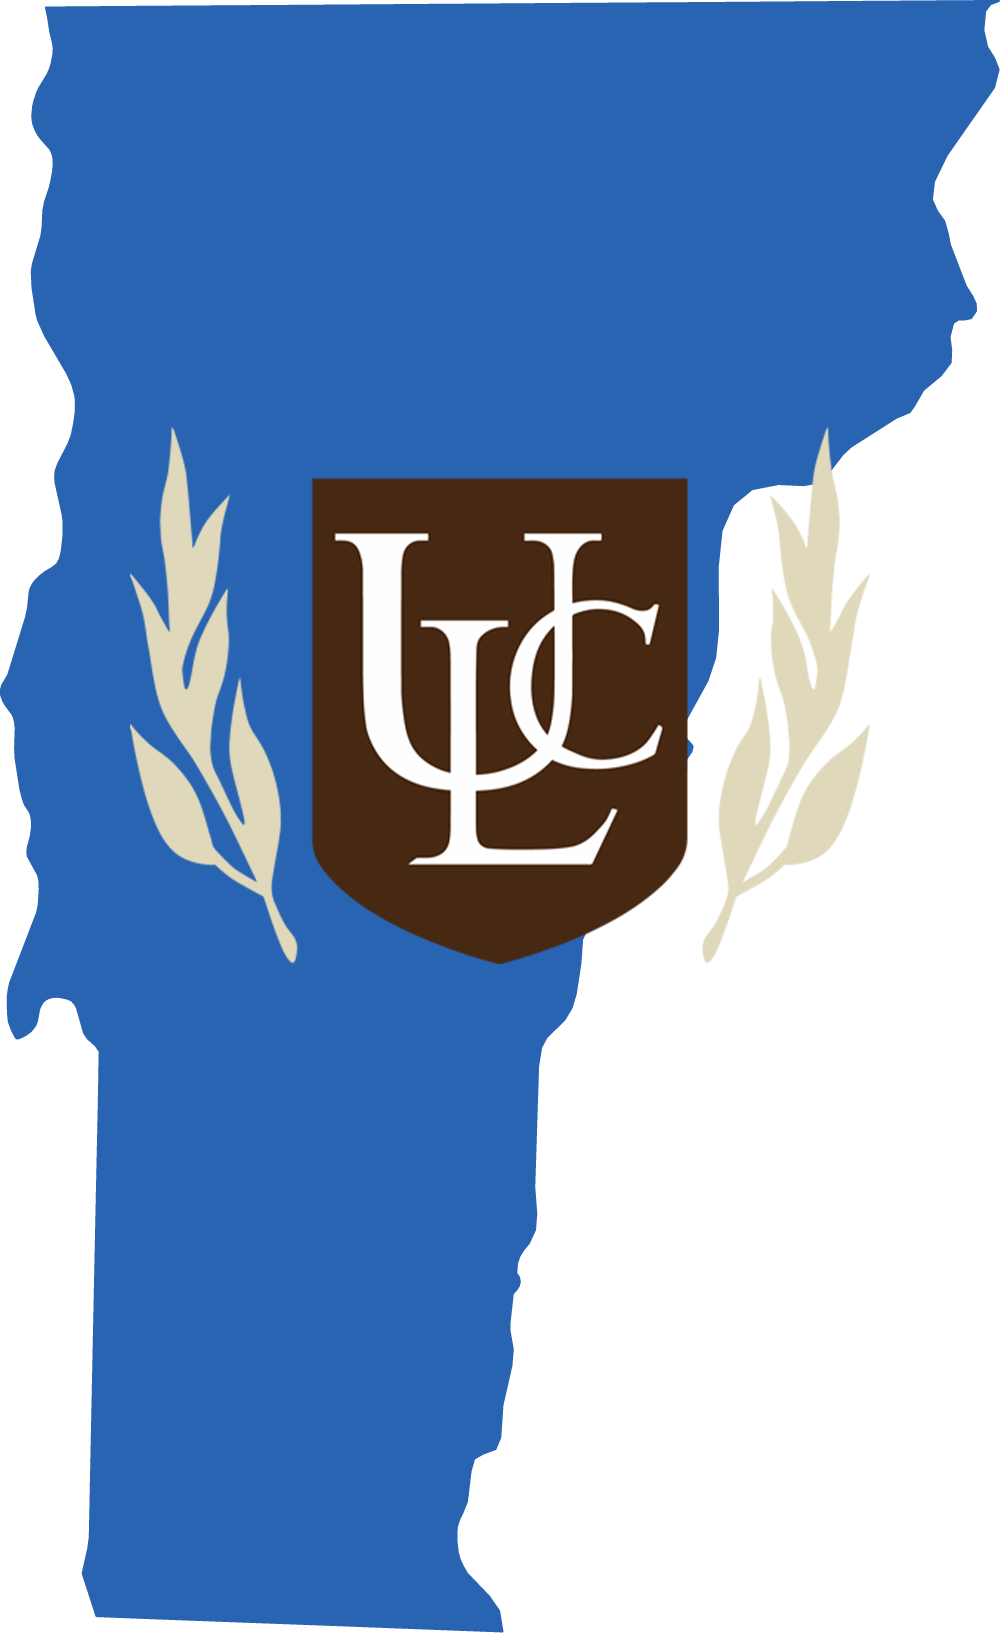 An outline of Vermont with the ULC logo